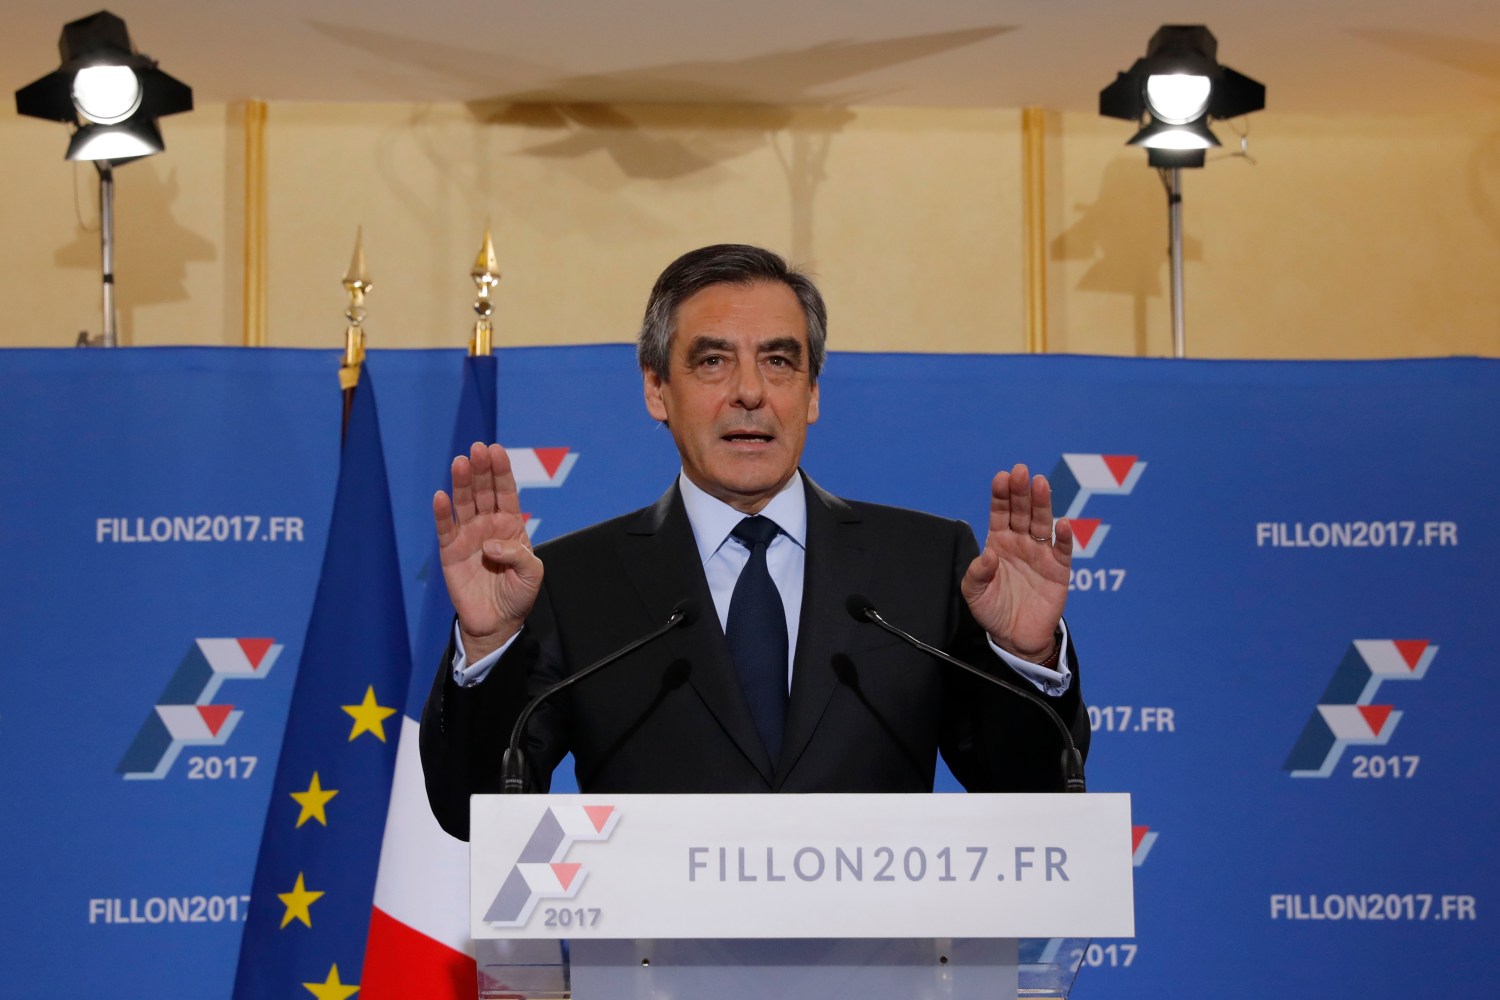 Francois Fillon, former French prime minister and member of Les Republicains political party, reacts as he delivers his speech after partial results in the second round for the French center-right presidential primary election in Paris, France, November 27, 2016. Fillon, a socially conservative free-marketeer, is to be the presidential candidate of the French centre-right in next year's election, according to partial results of a primaries' second-round vote showed on Sunday. REUTERS/Christian Hartmann - RTSTKN8